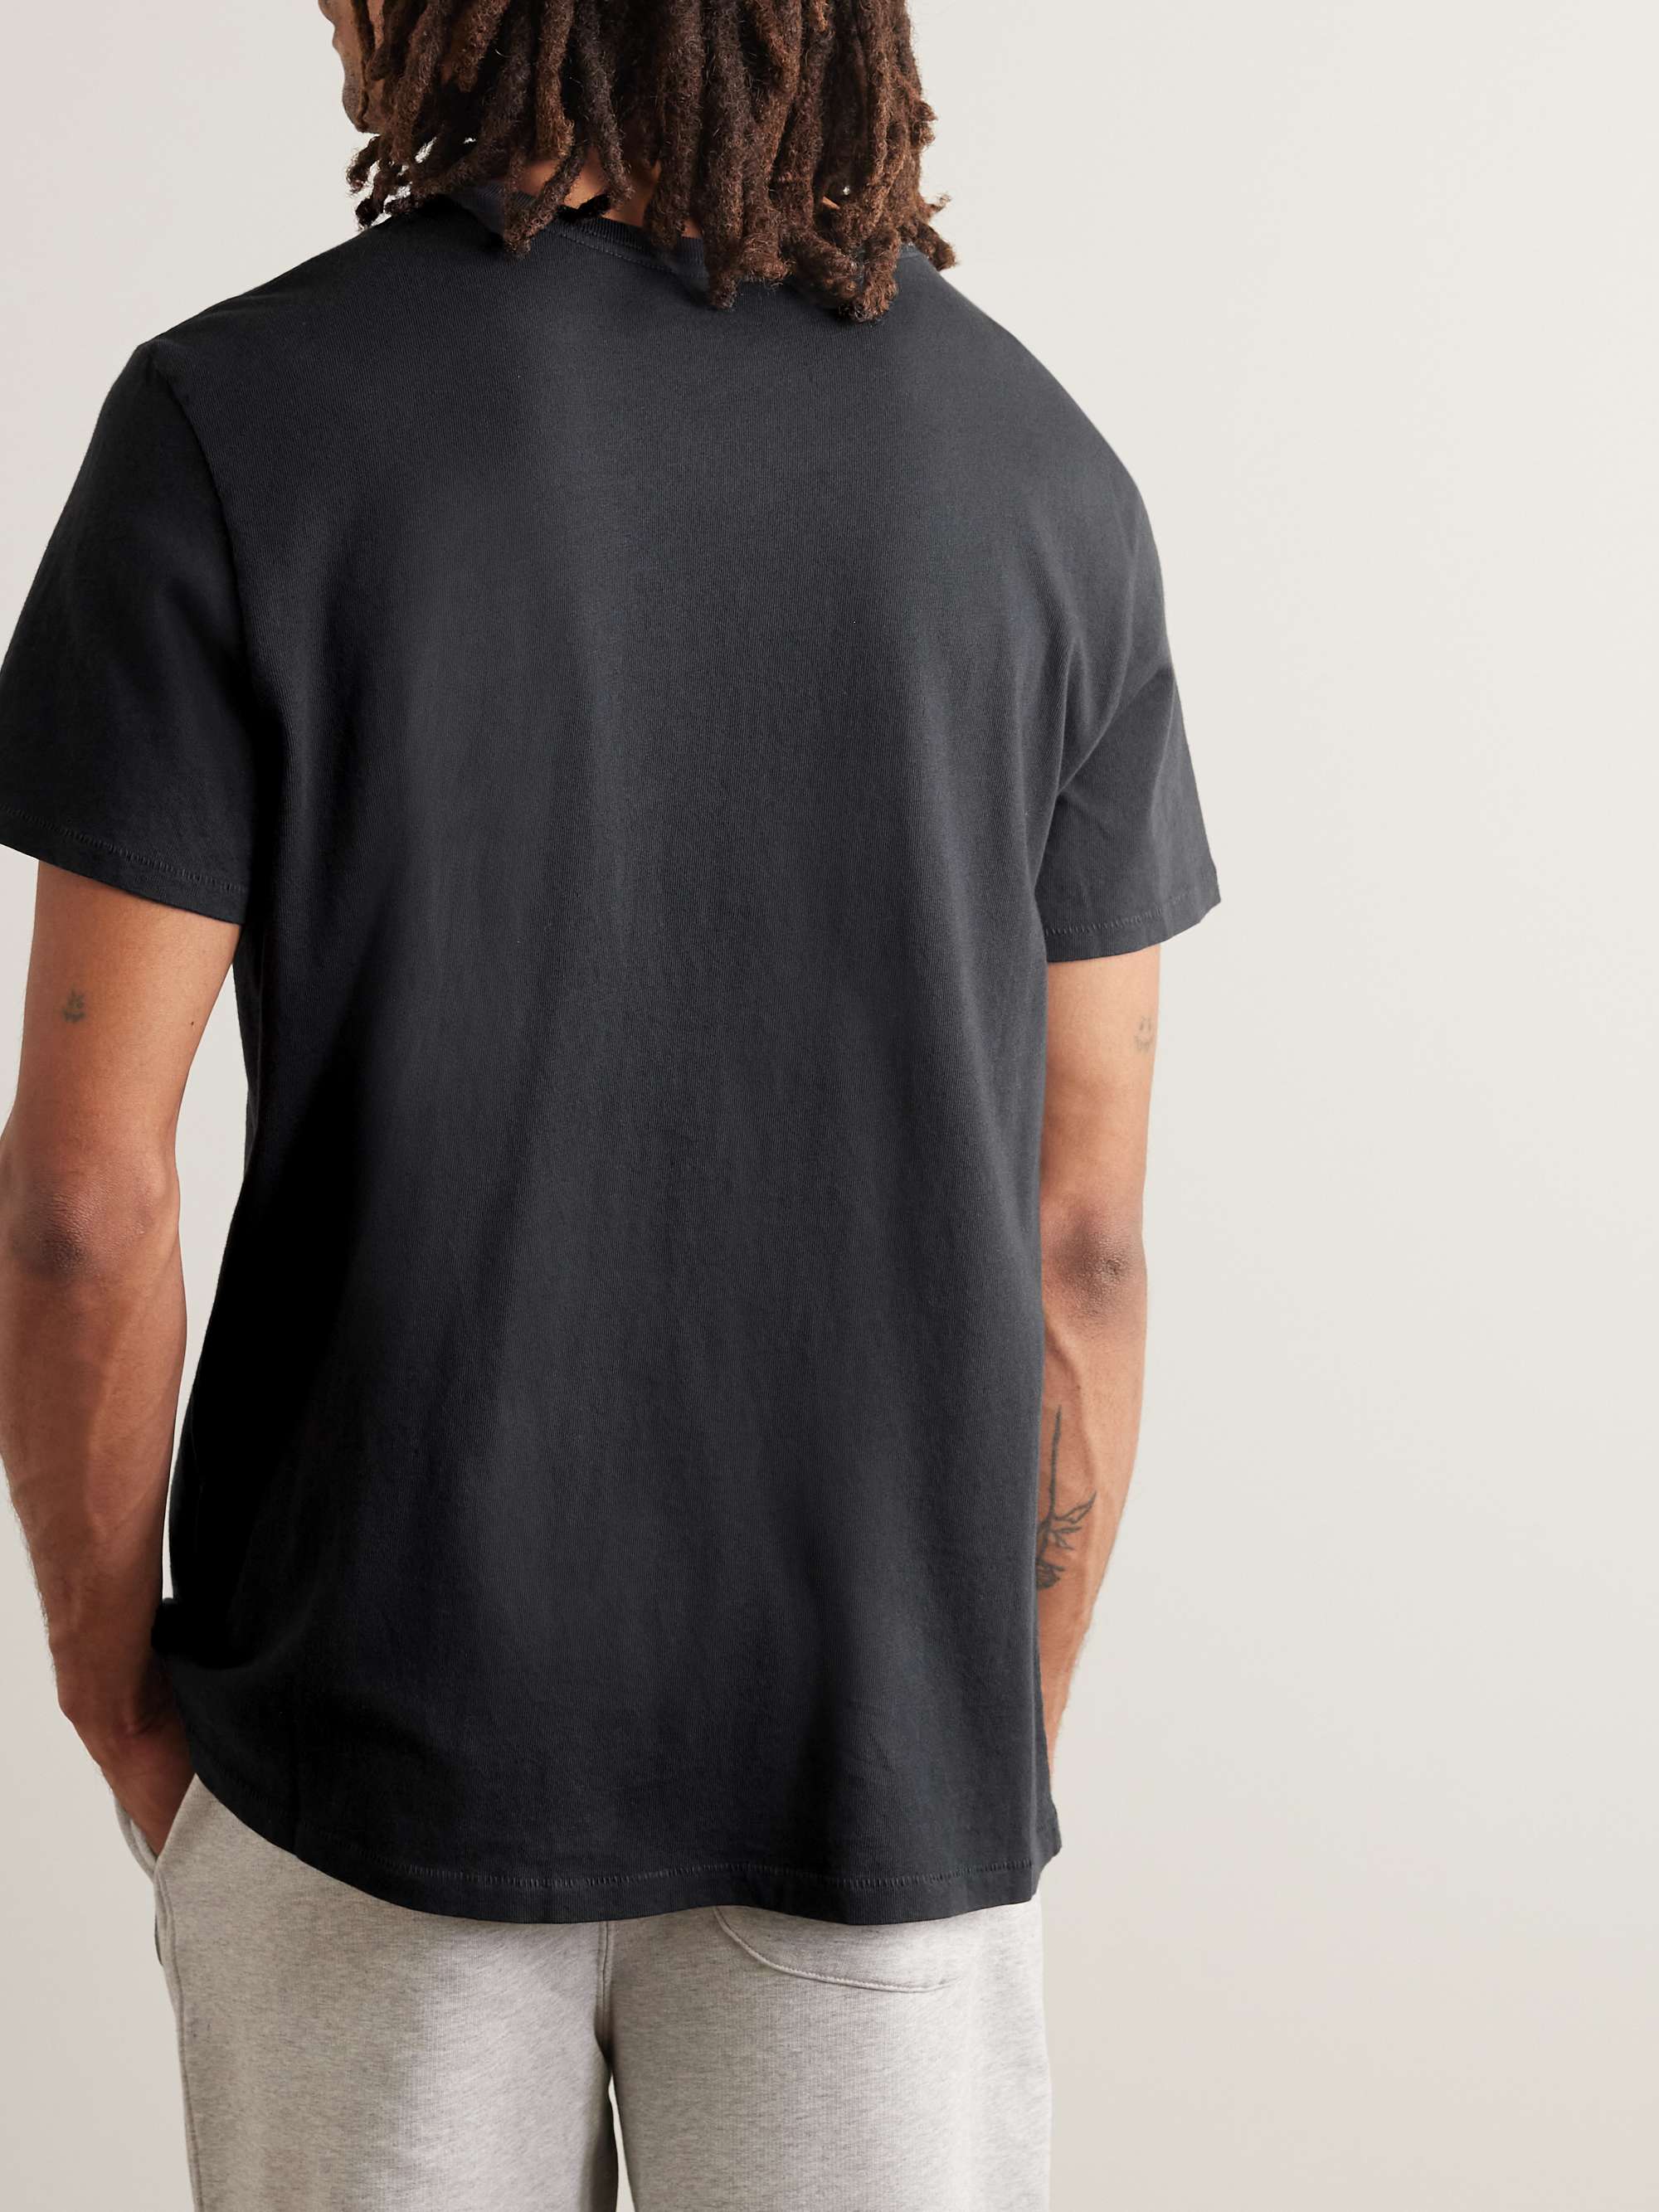 OUTERKNOWN Groovy Organic Cotton-Jersey T-Shirt for Men | MR PORTER